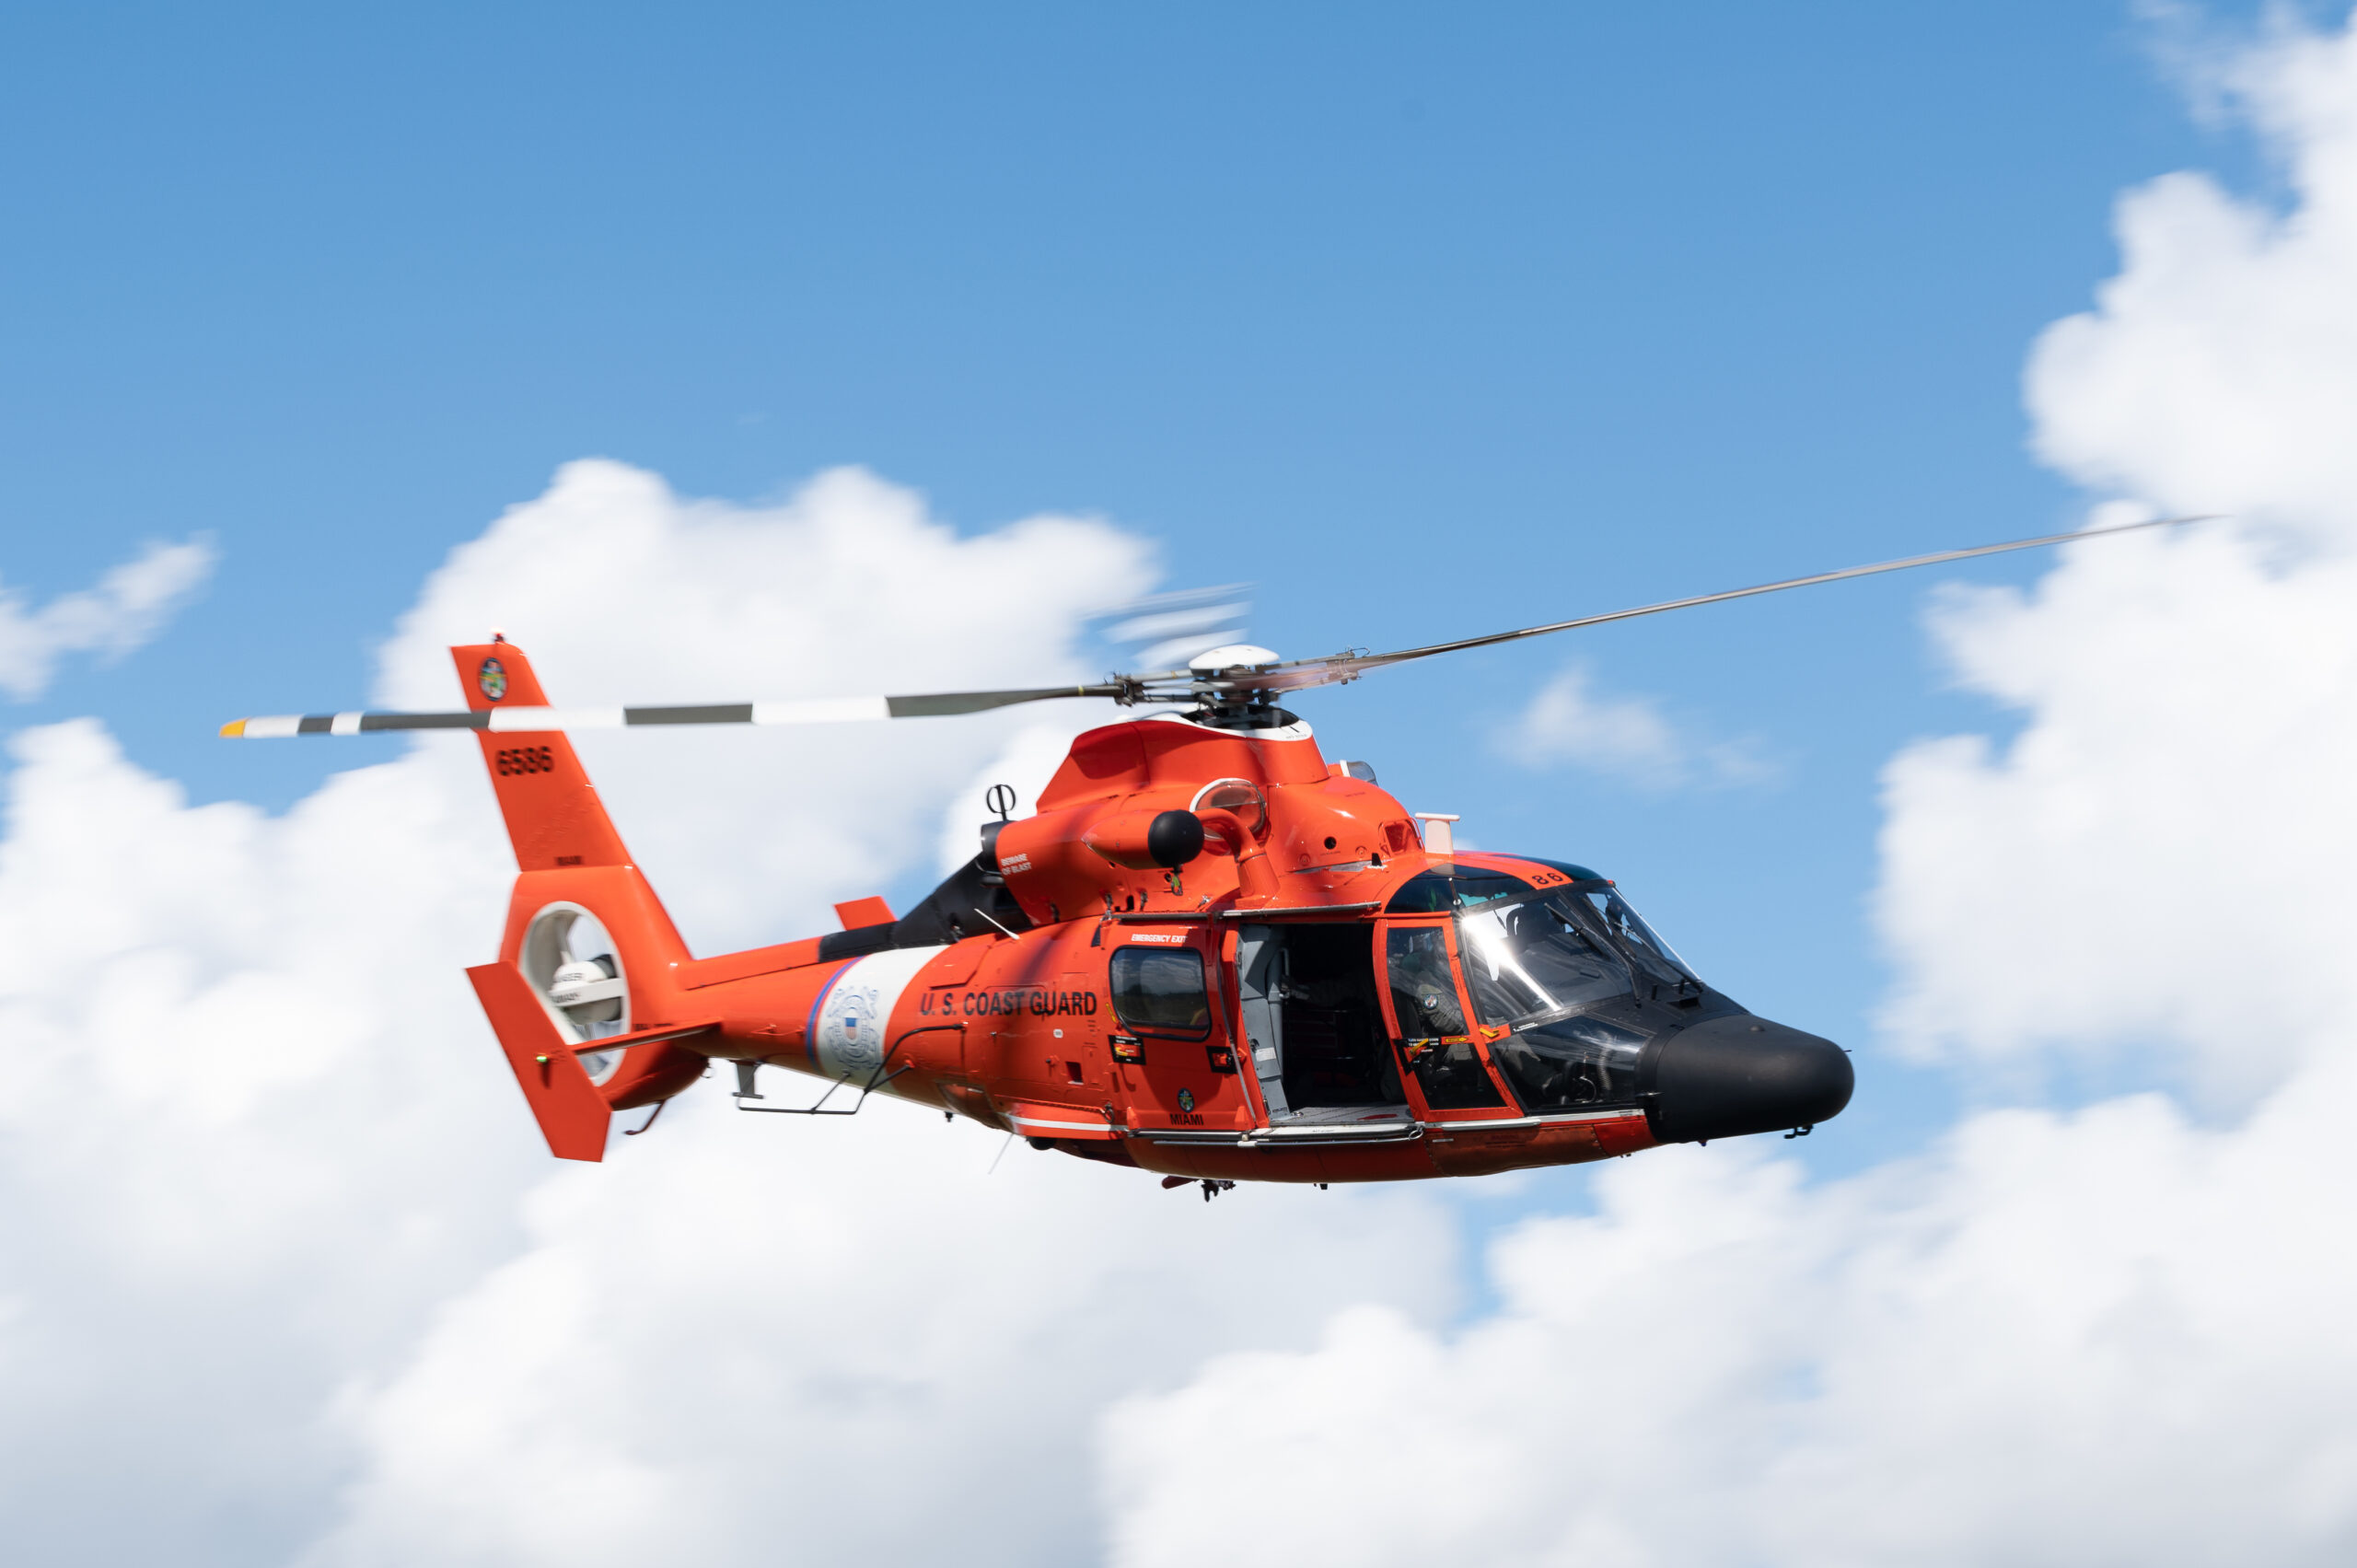 United States Coast Guard MH-65 Dolphin helicopter from Coast Guard Air Station Miami, training at Homestead ARB.